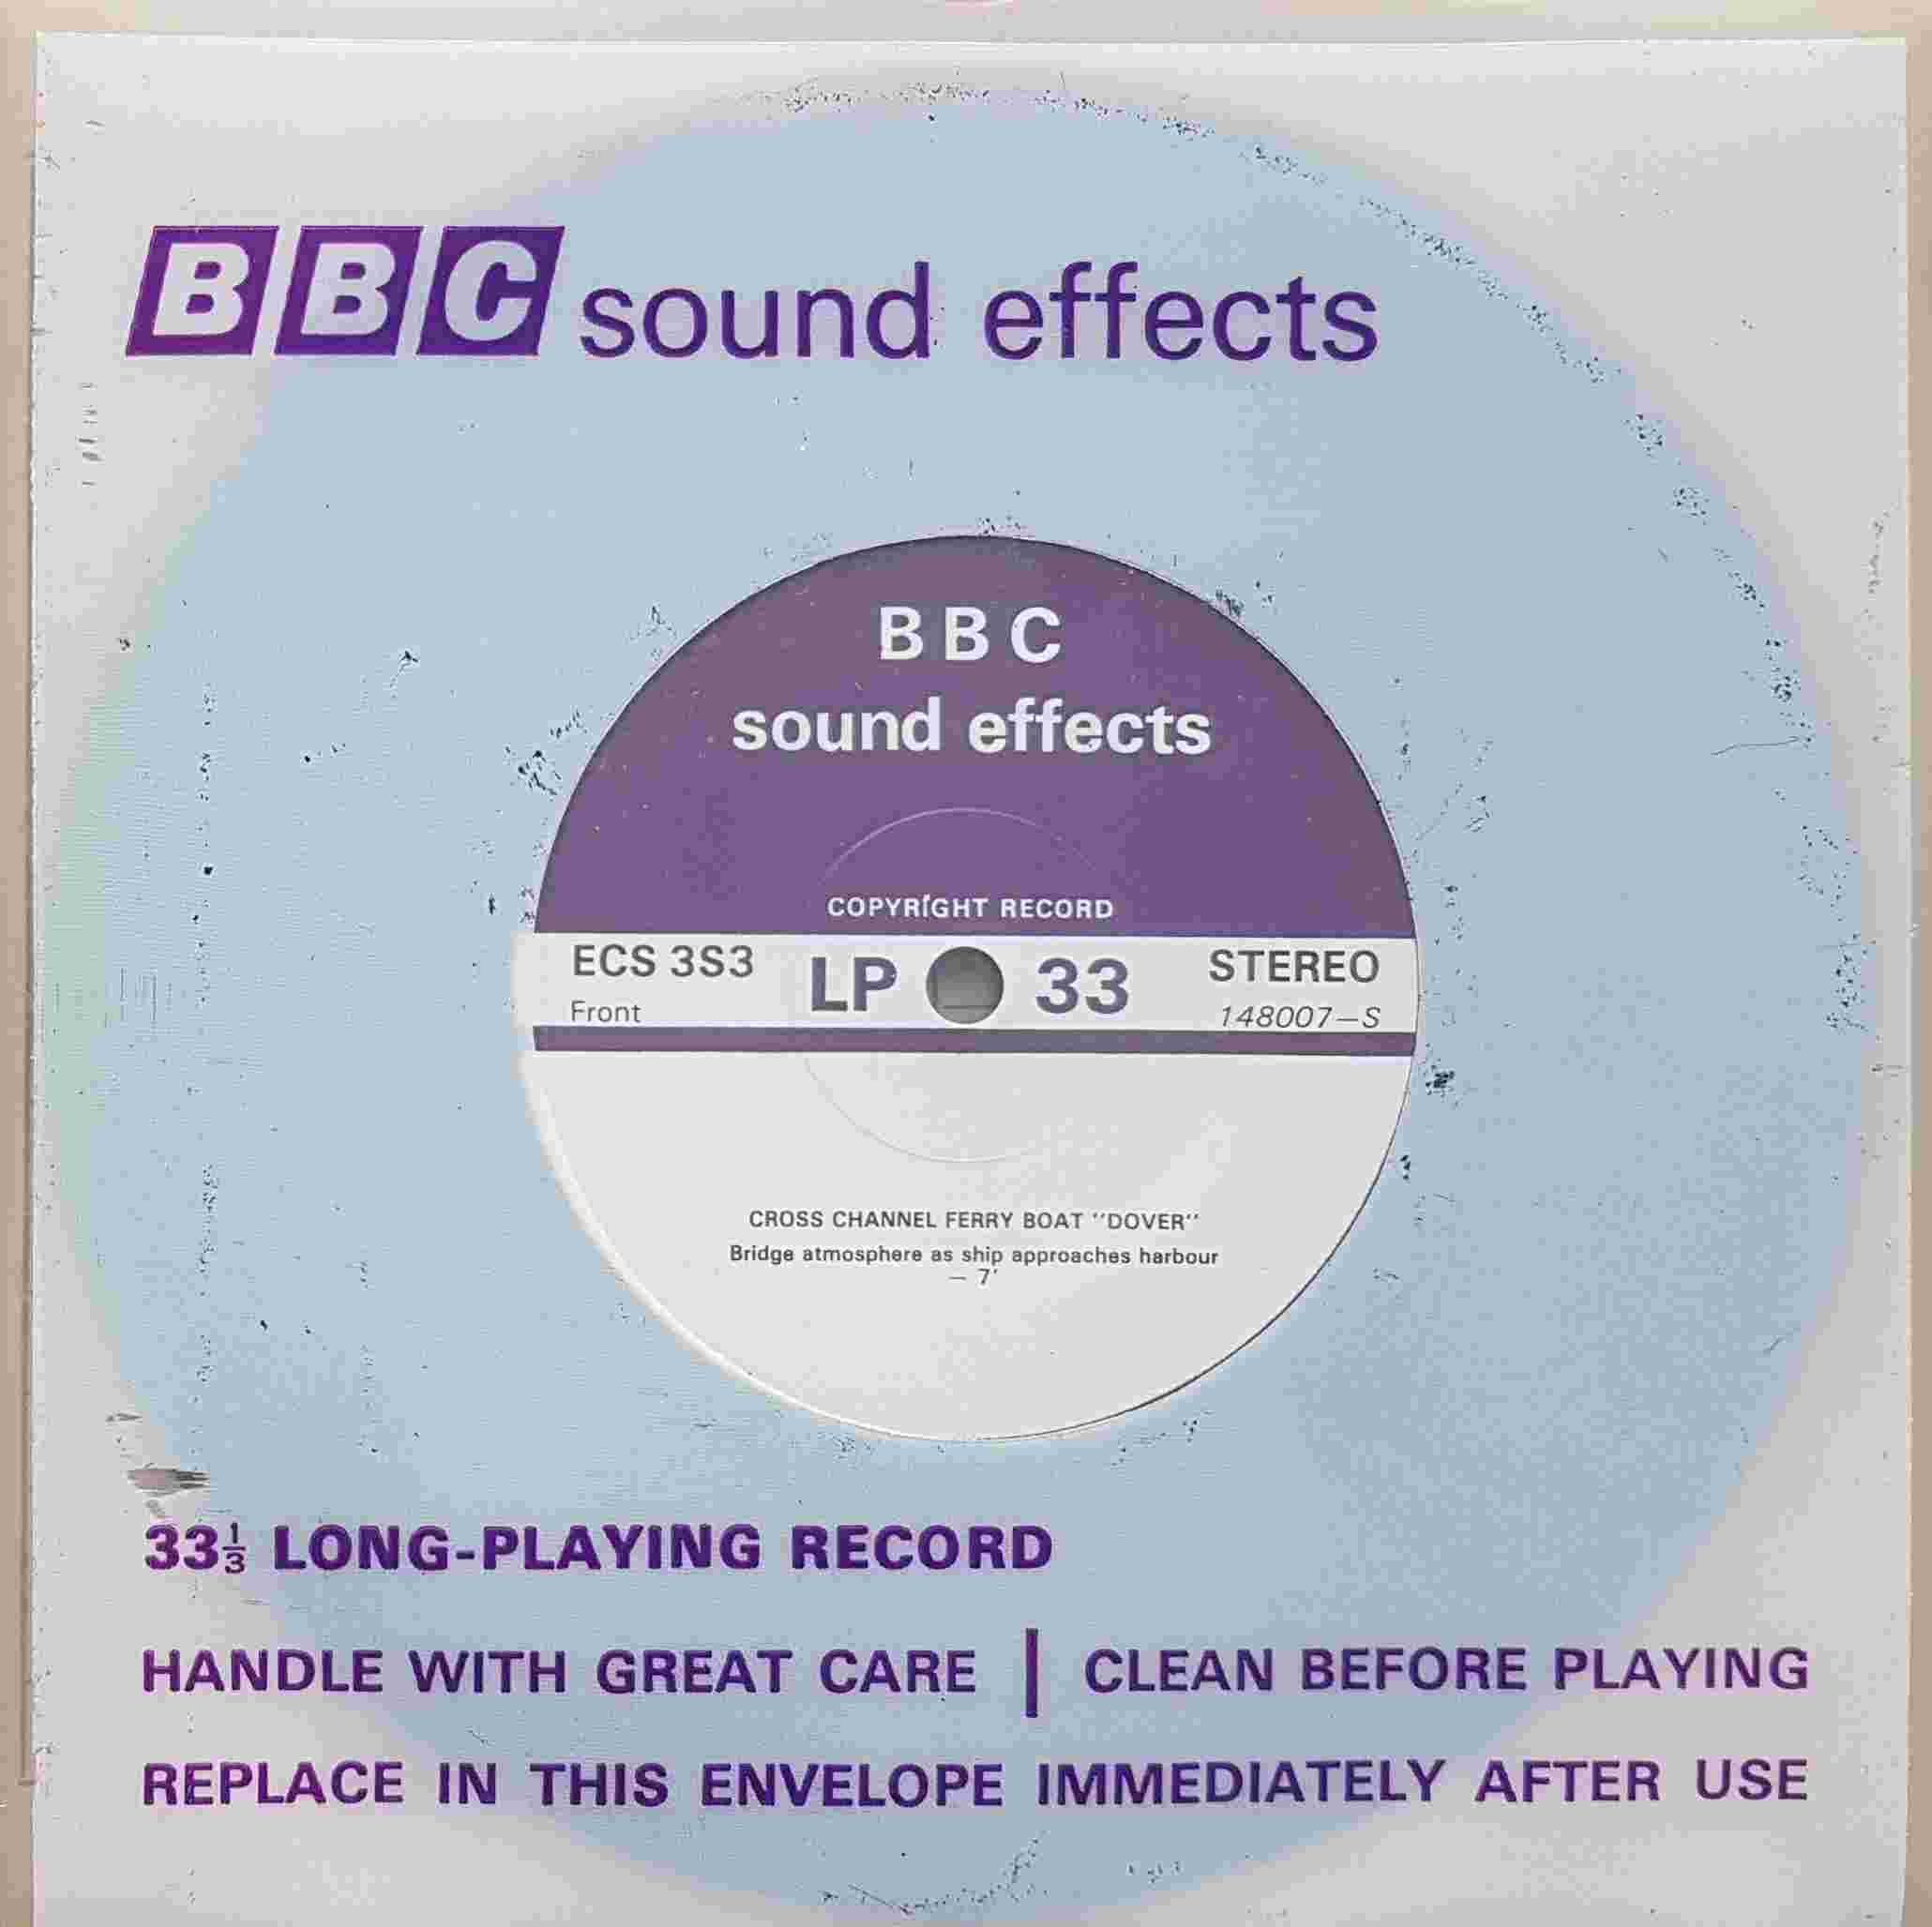 Picture of ECS 3S3 Cross-channel ferry boat 'Dover' by artist Not registered from the BBC singles - Records and Tapes library